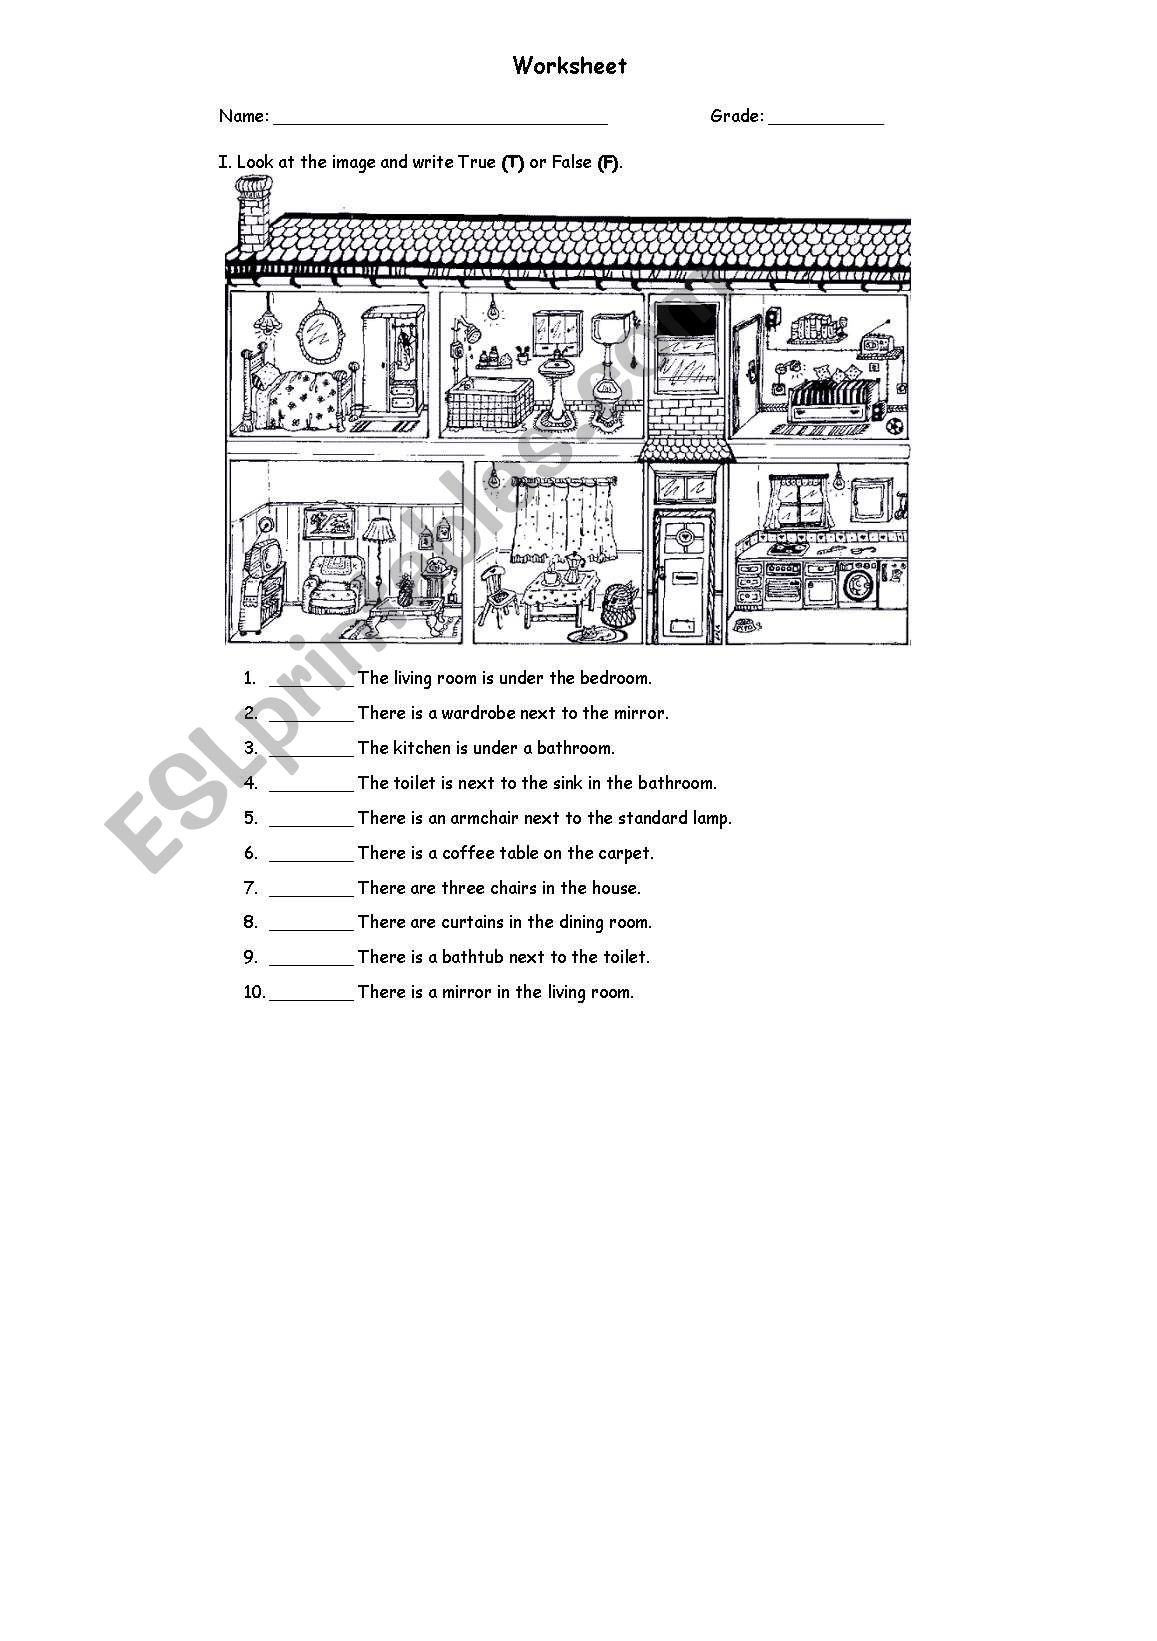 parts of the house worksheet